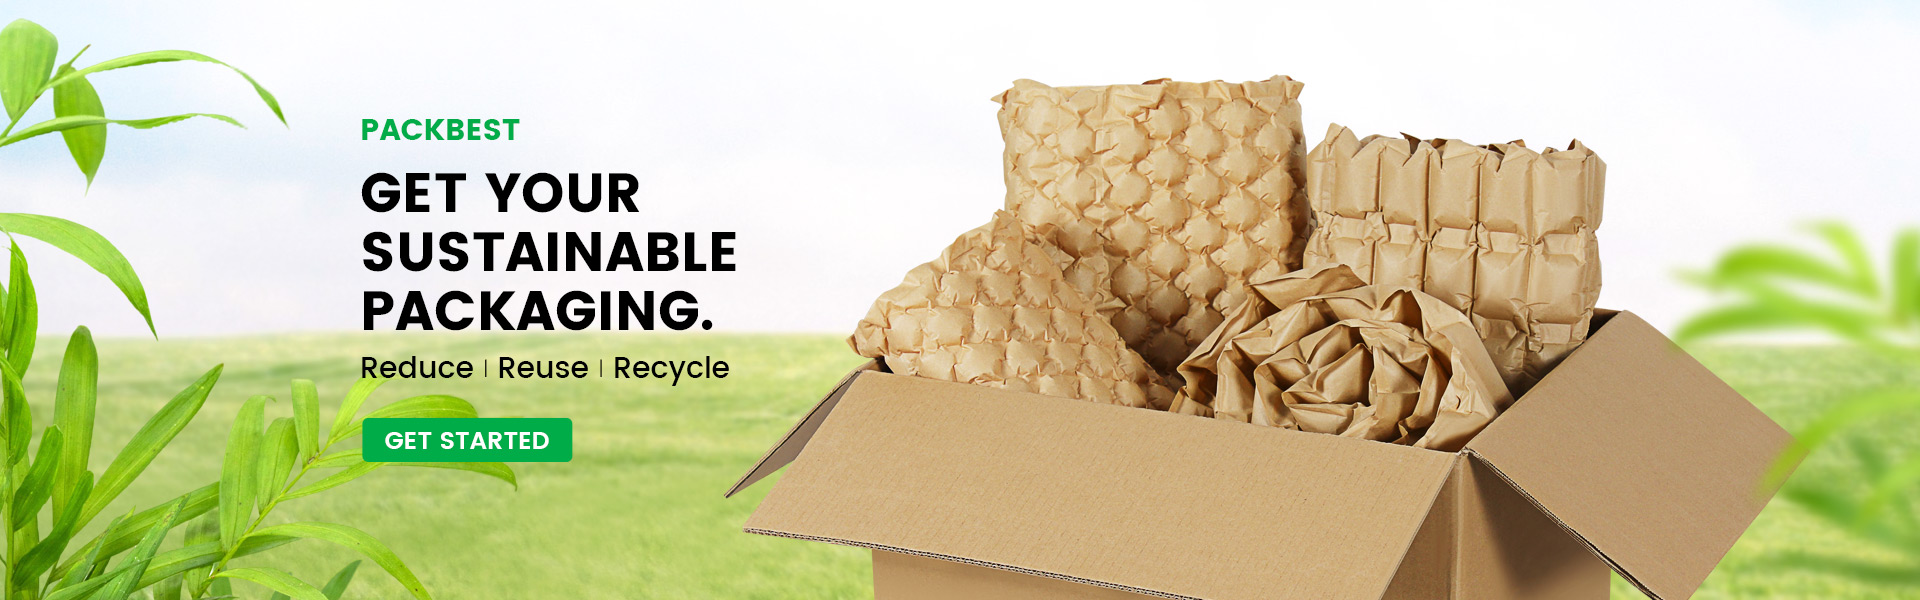 Get Your Sustainable Packaging